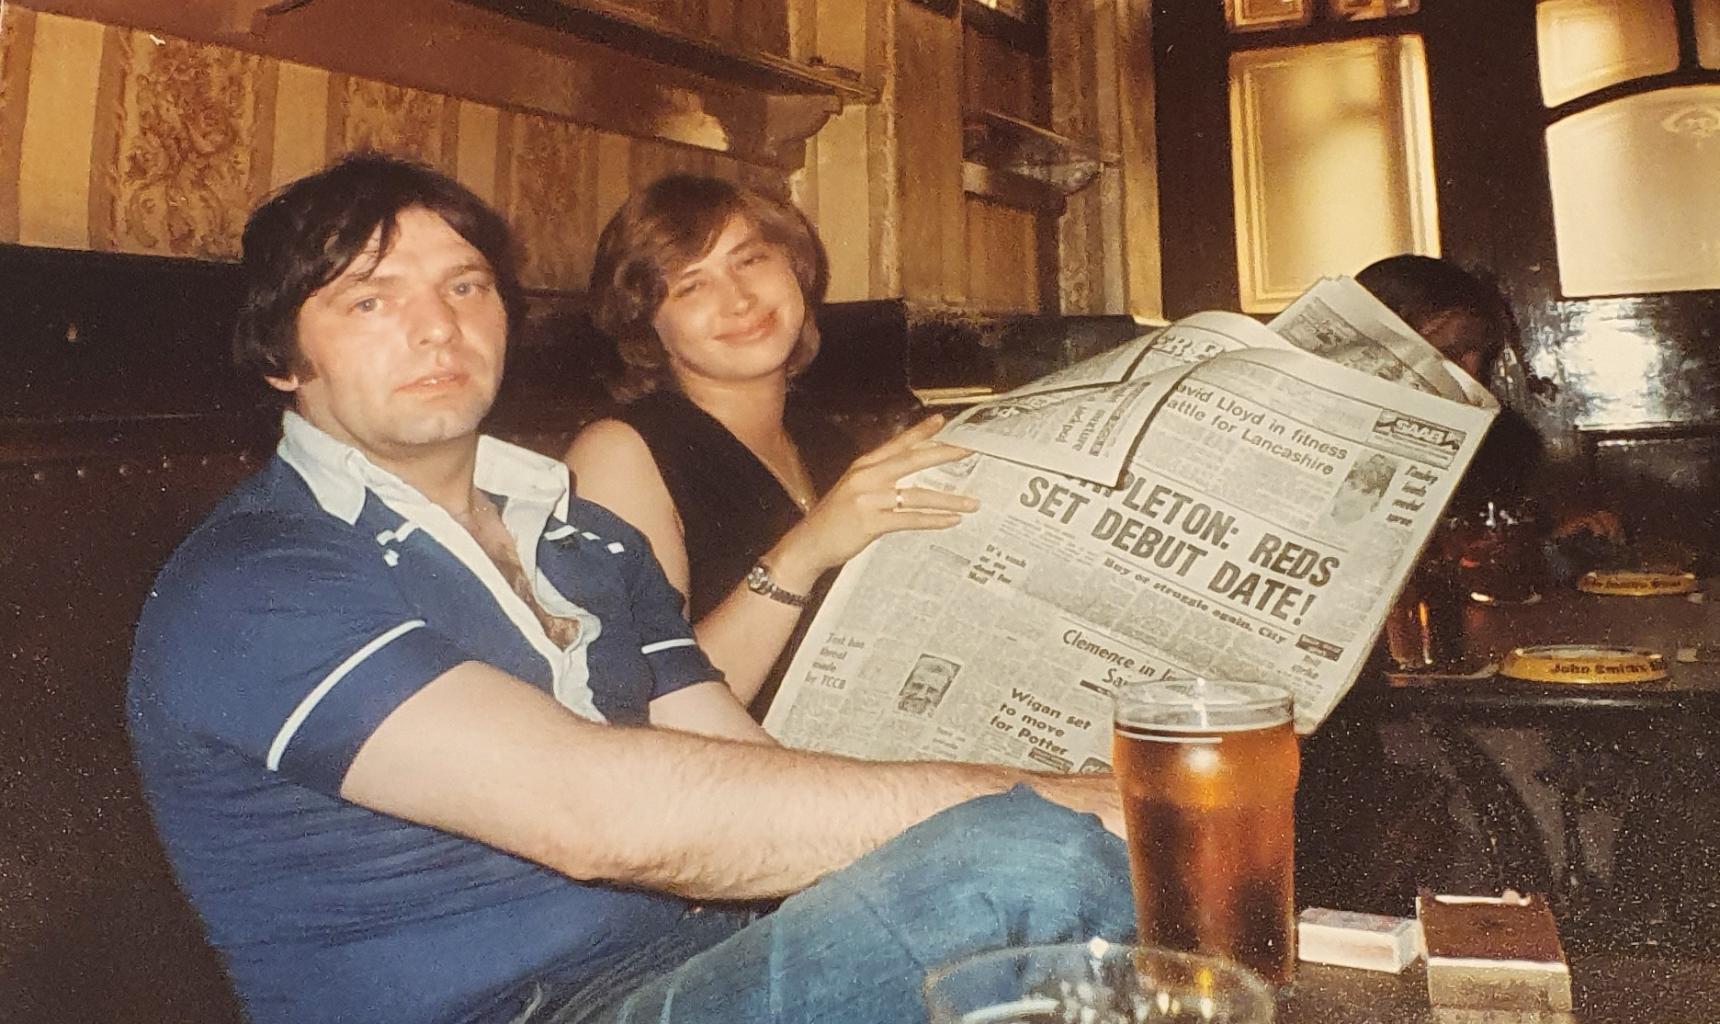 An old photograph of Candy and Stan in the pub reading the sports section of the Manchester Evening News